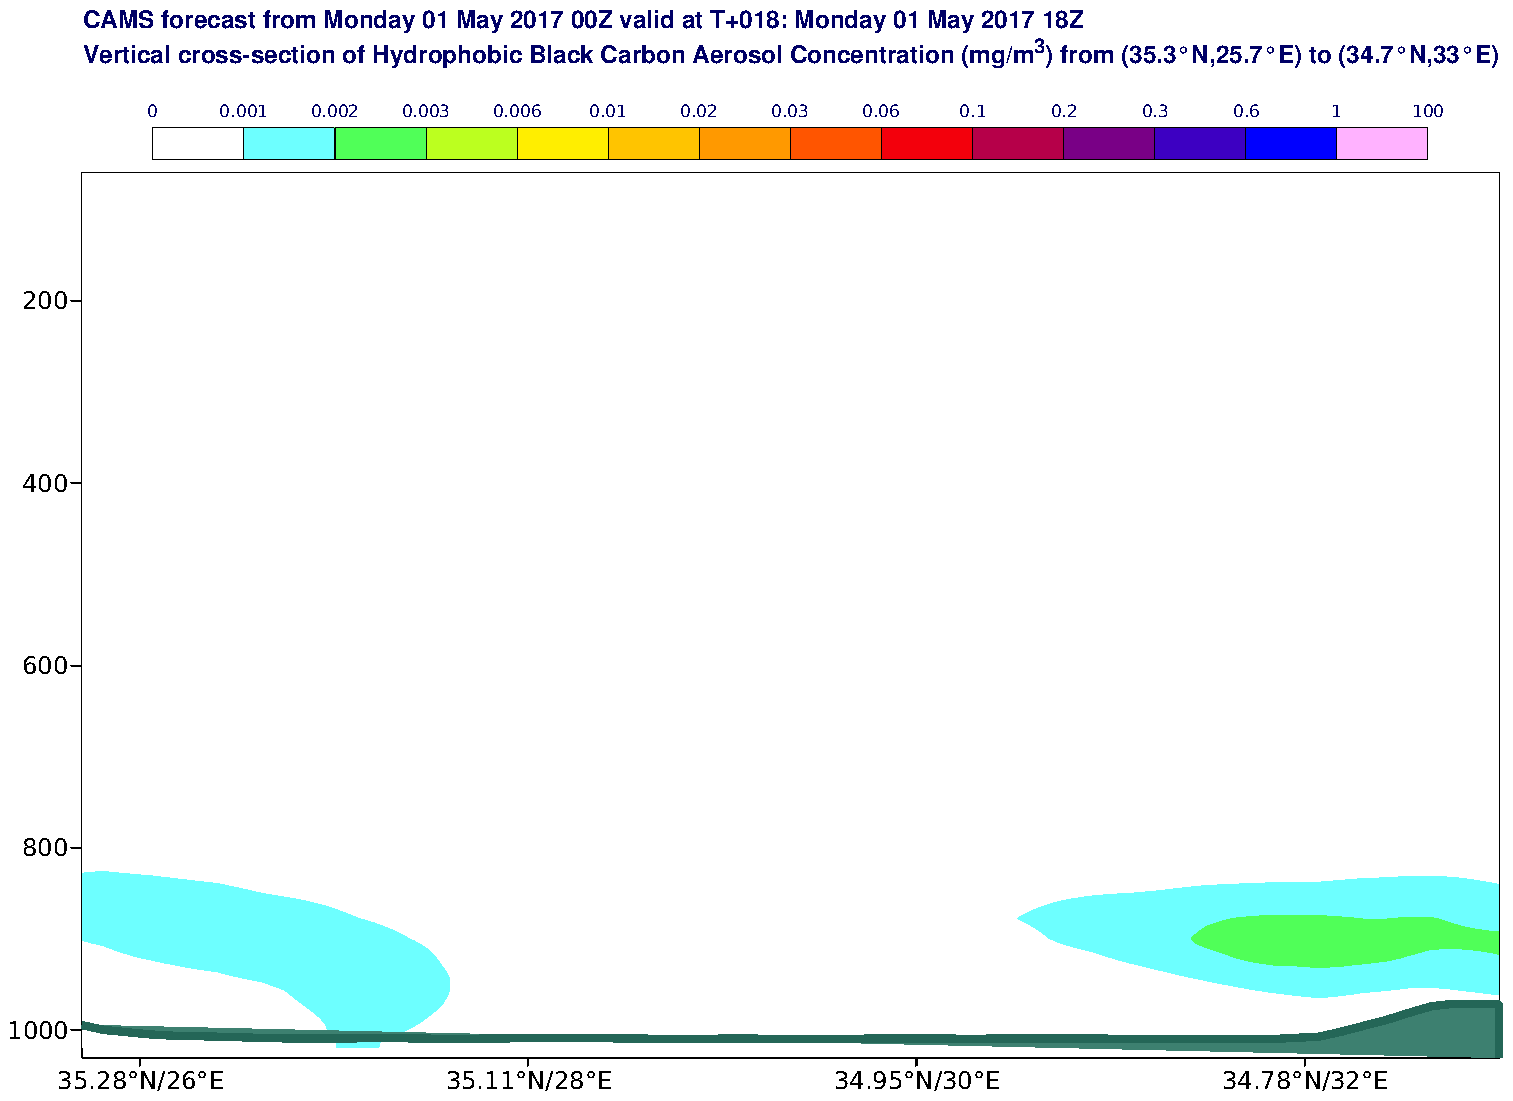 Vertical cross-section of Hydrophobic Black Carbon Aerosol Concentration (mg/m3) valid at T18 - 2017-05-01 18:00